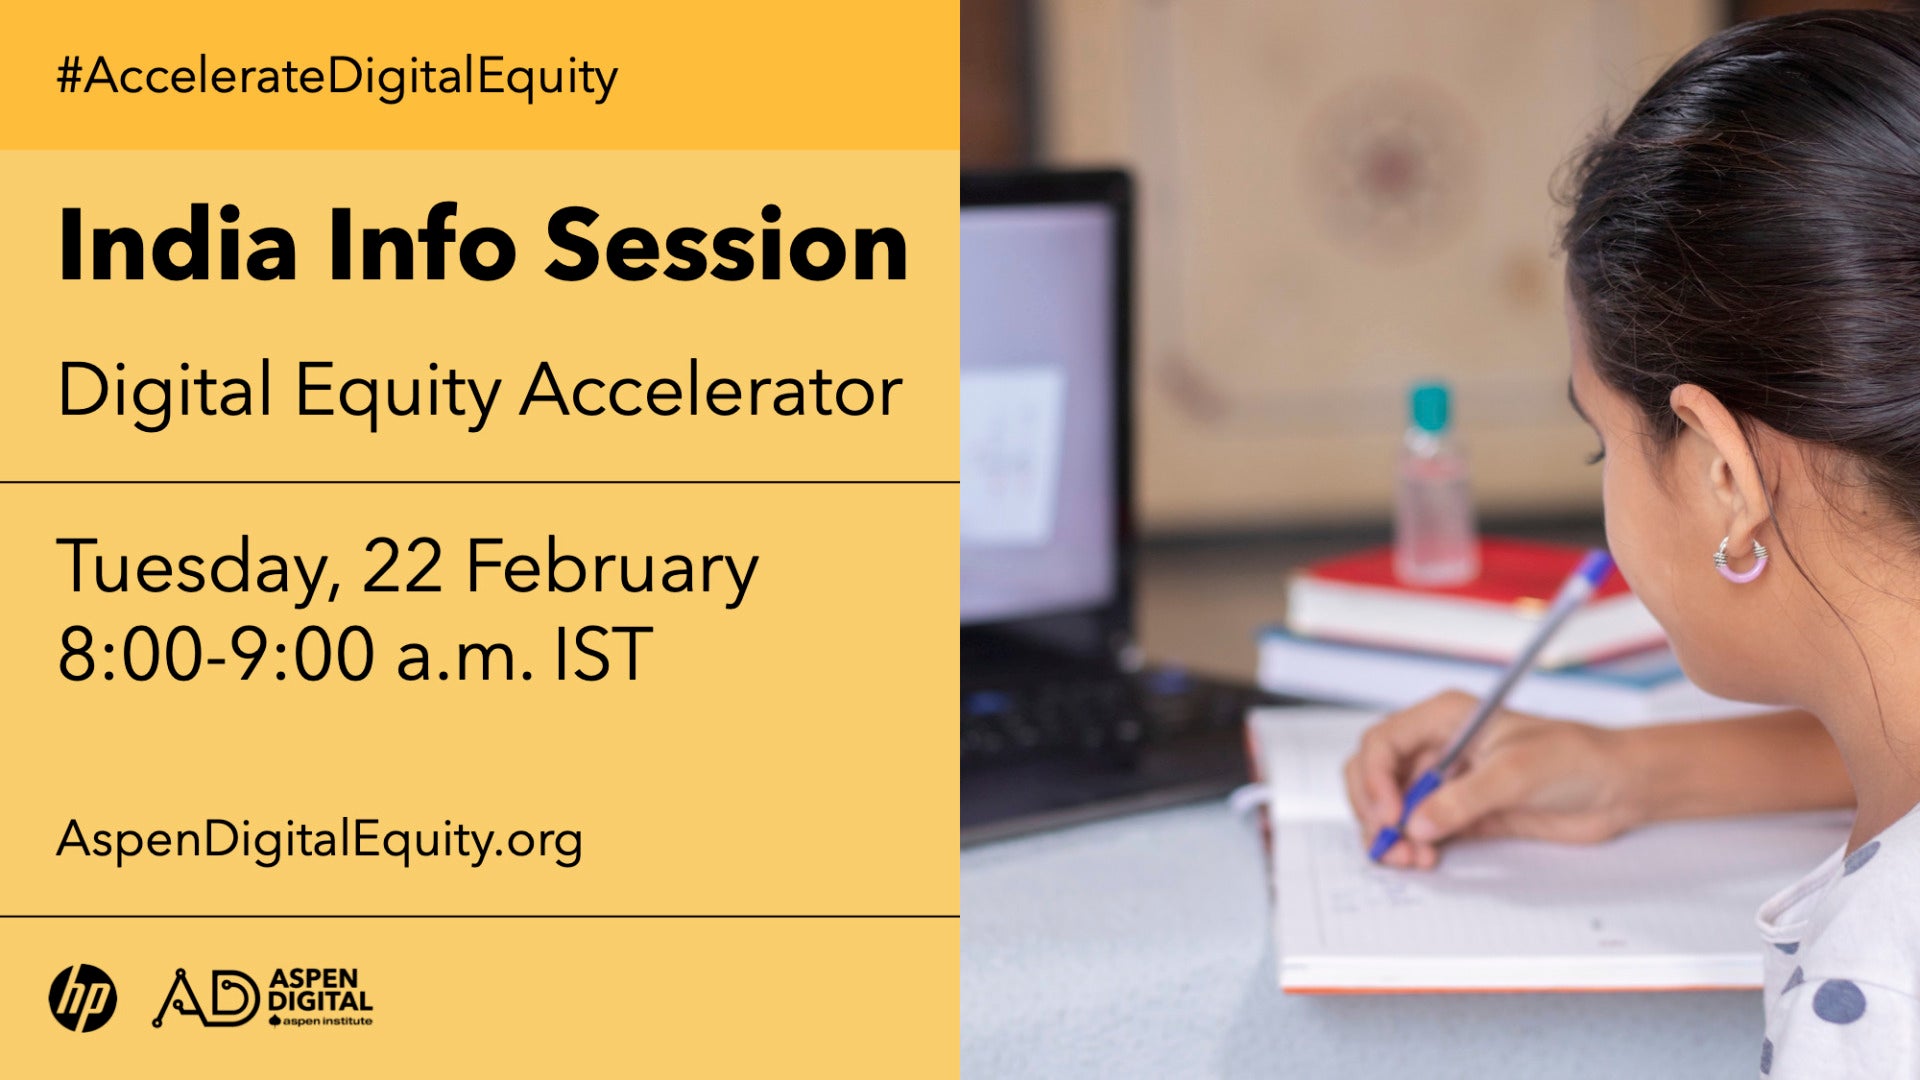 India Info Session: Digital Equity Accelerator